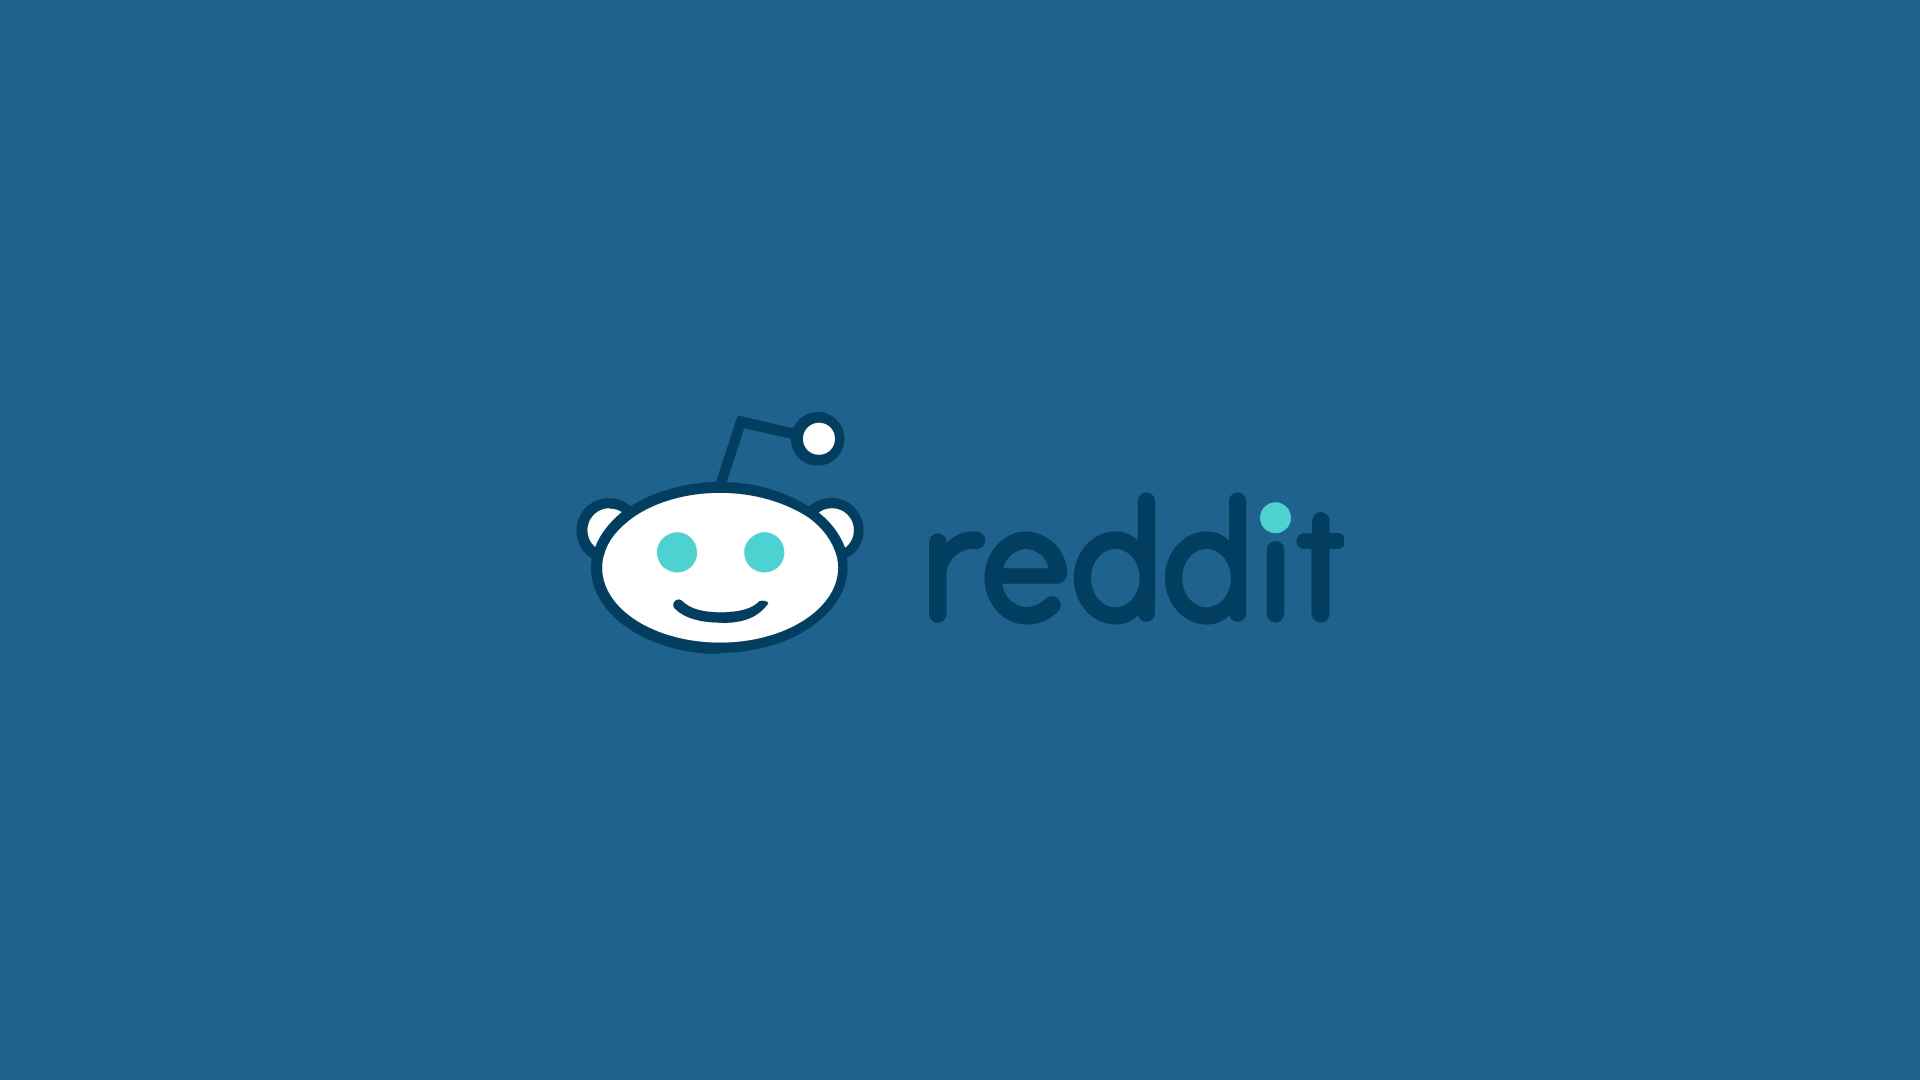 Are there any features or tools on Reddit that help filter or sort content based on preferences?